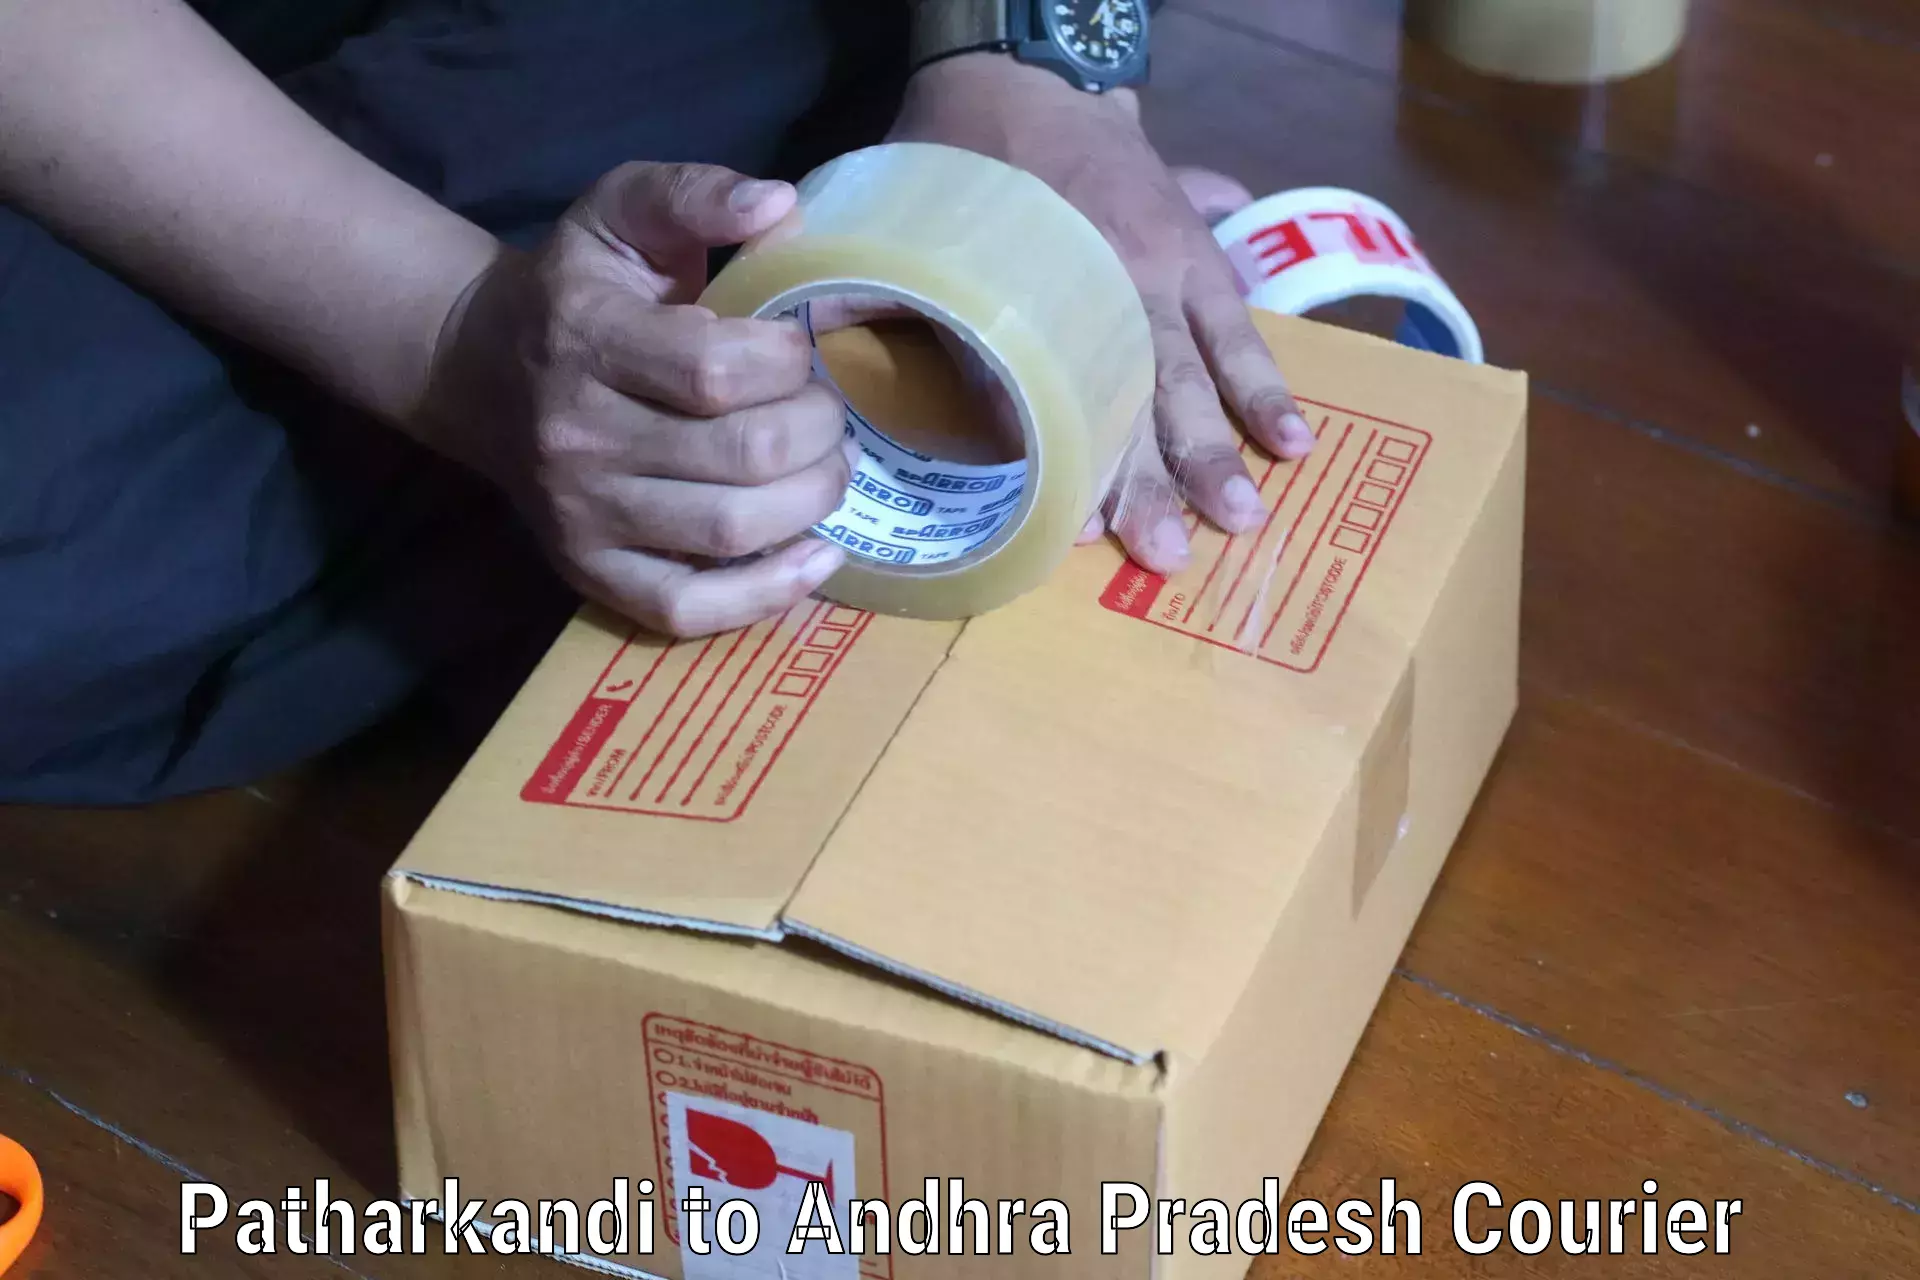 Easy access courier services Patharkandi to Visakhapatnam